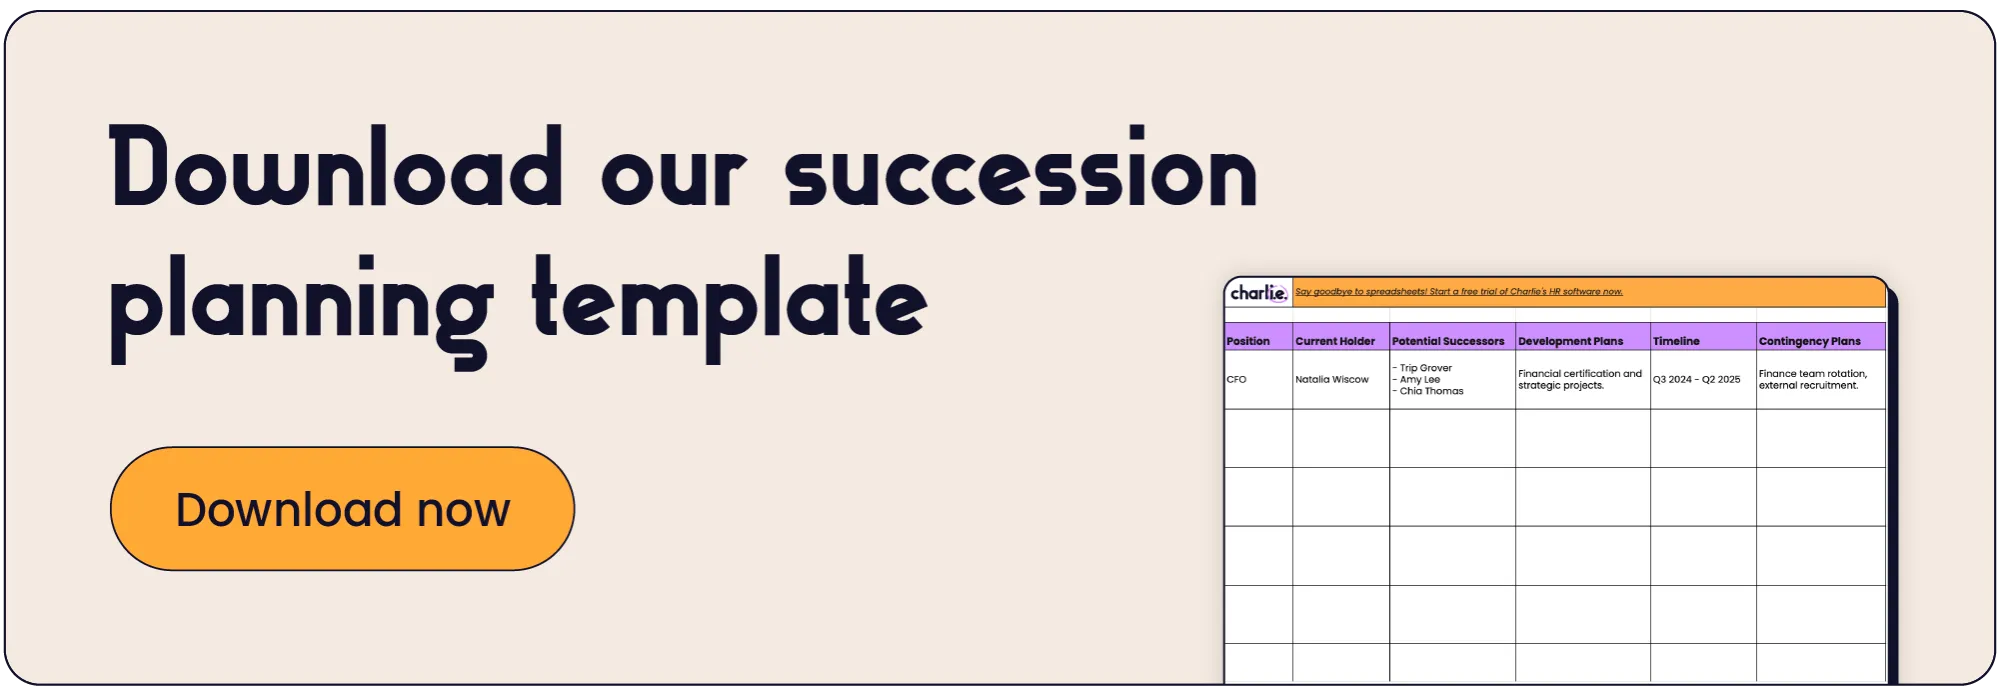 Download our succession planning template.webp